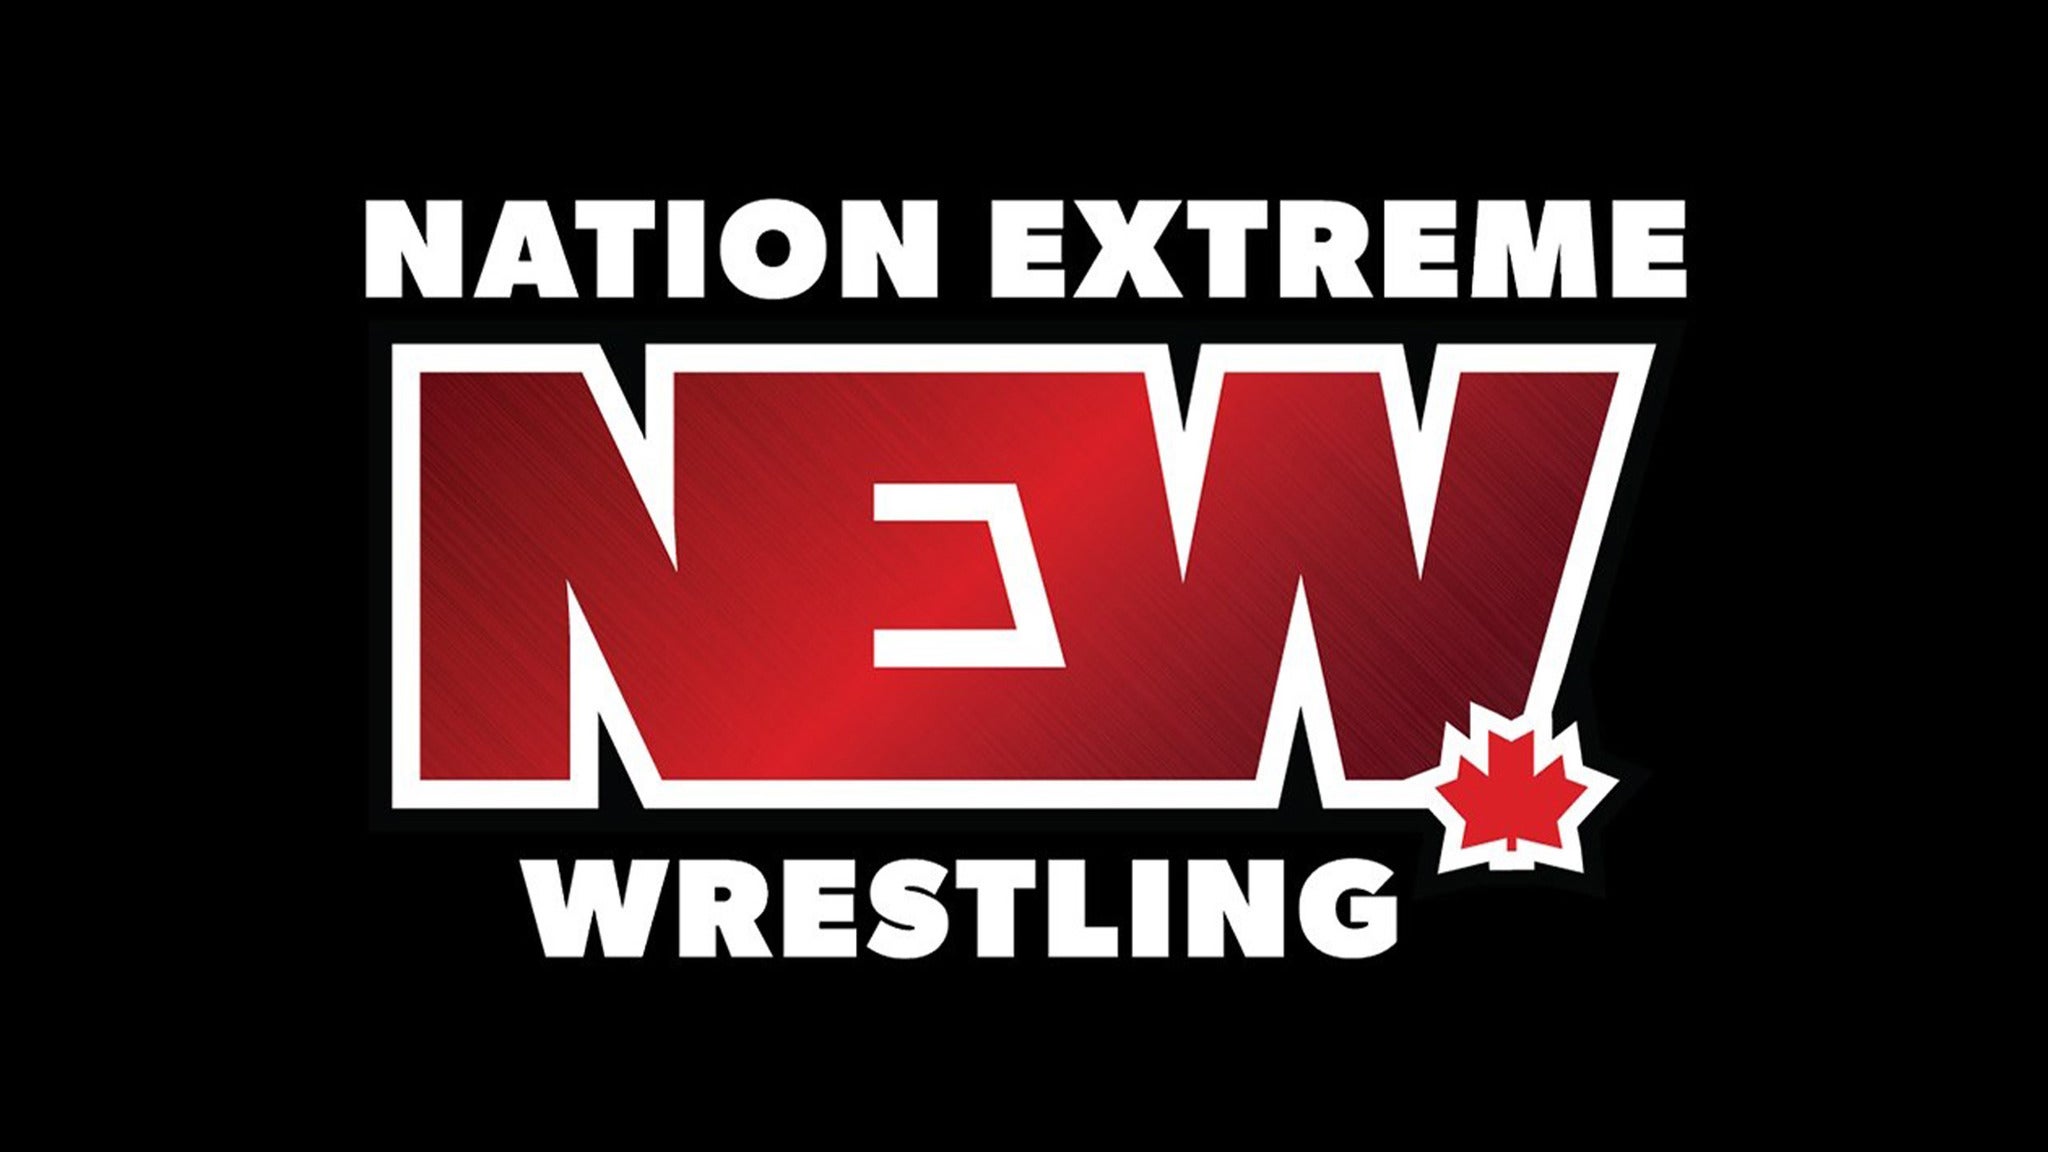 Nation Extreme Wrestling (NEW Wrestling) in Vancouver promo photo for N.e.w. presale offer code